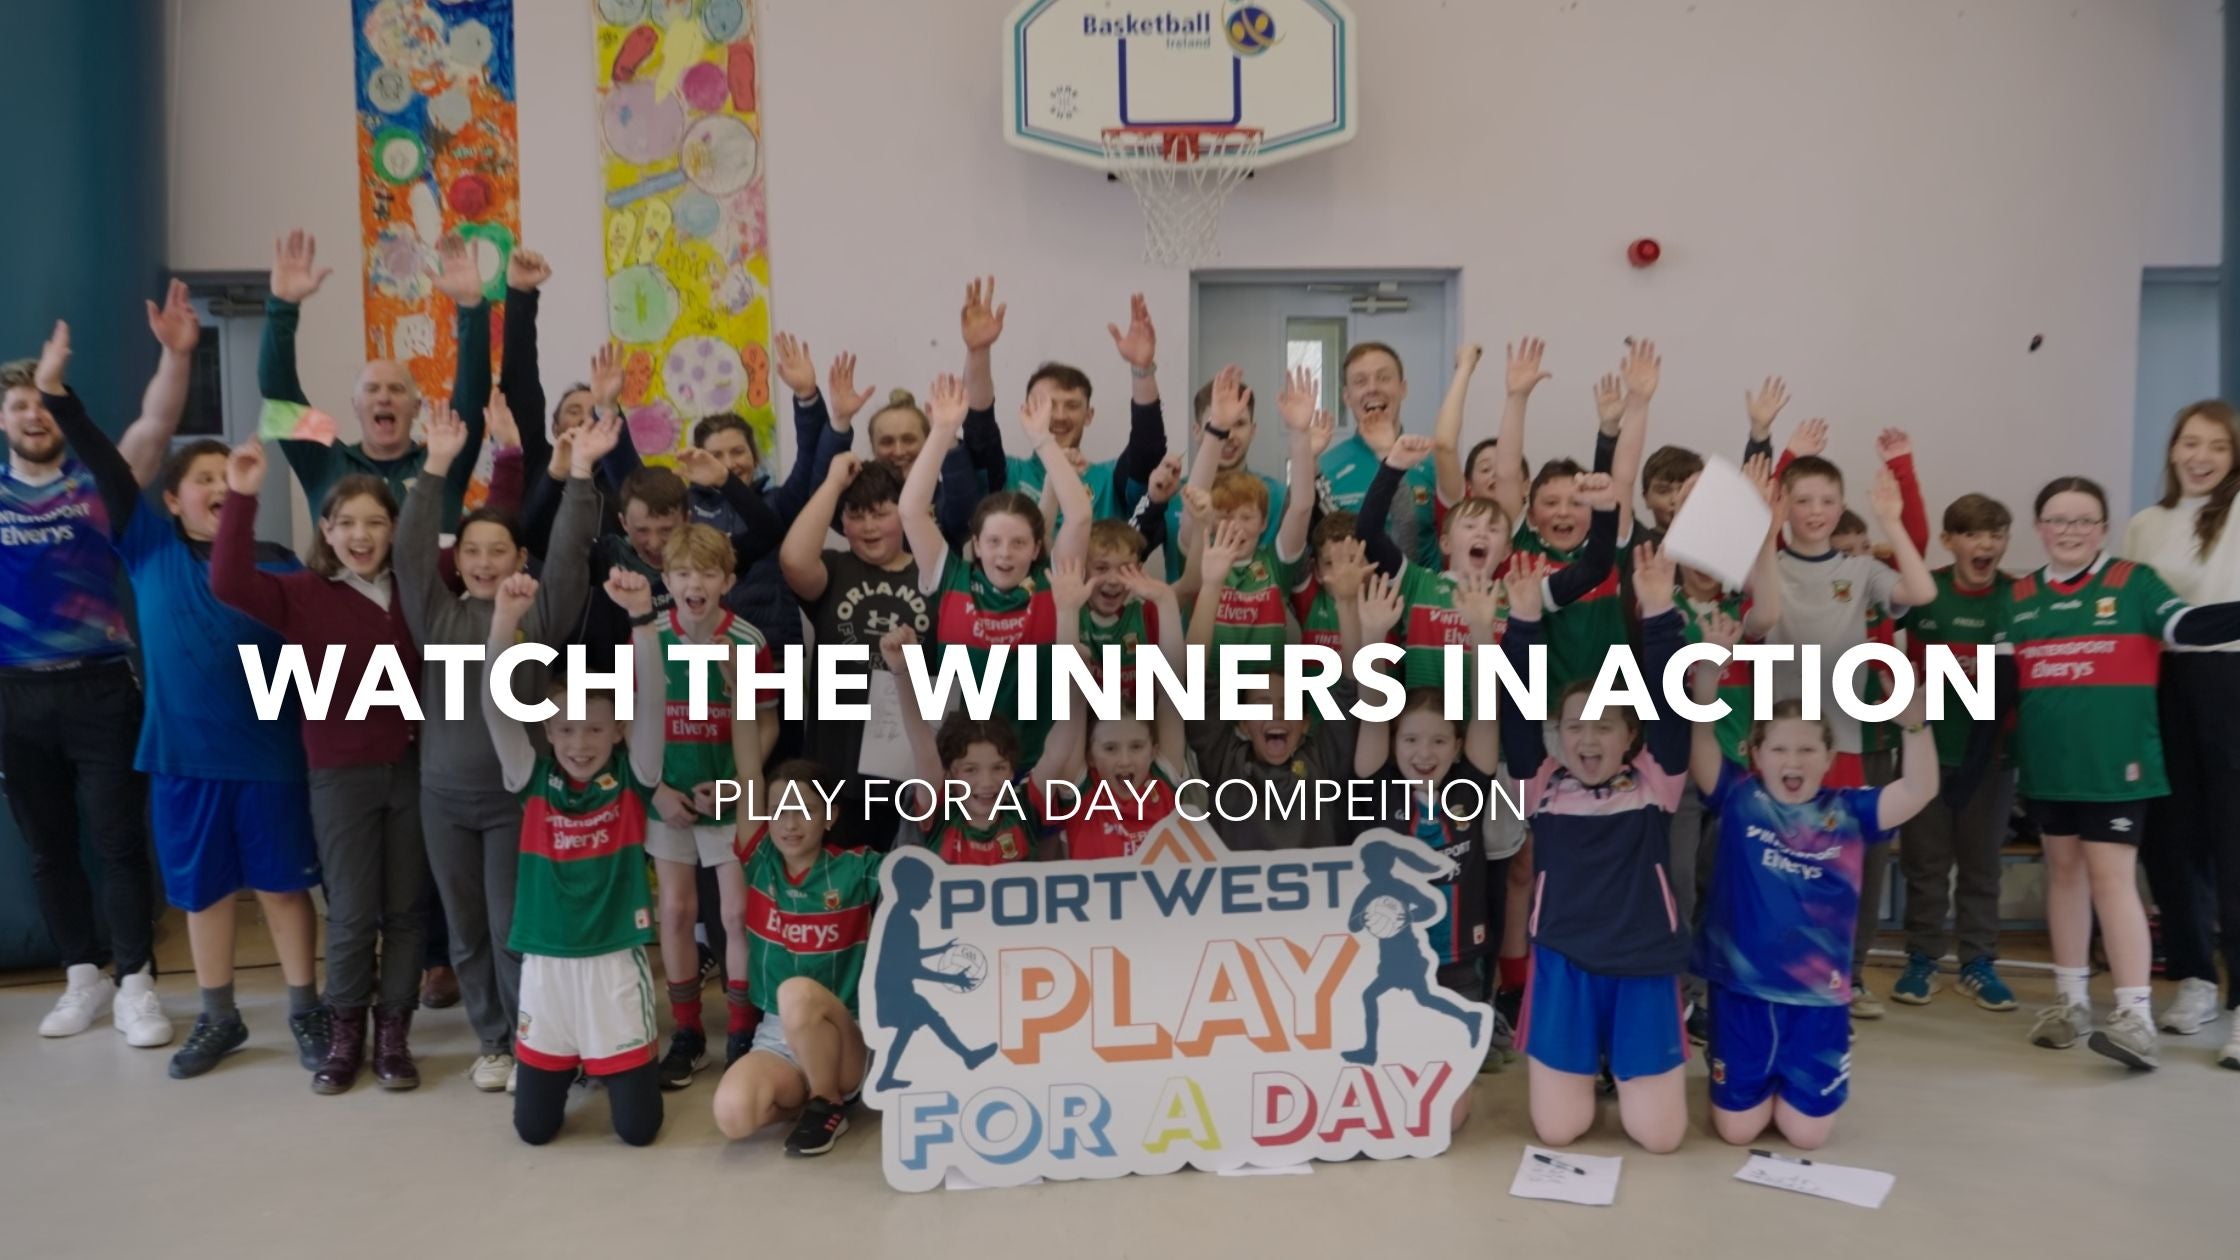 Winners in Action - Play for a Day